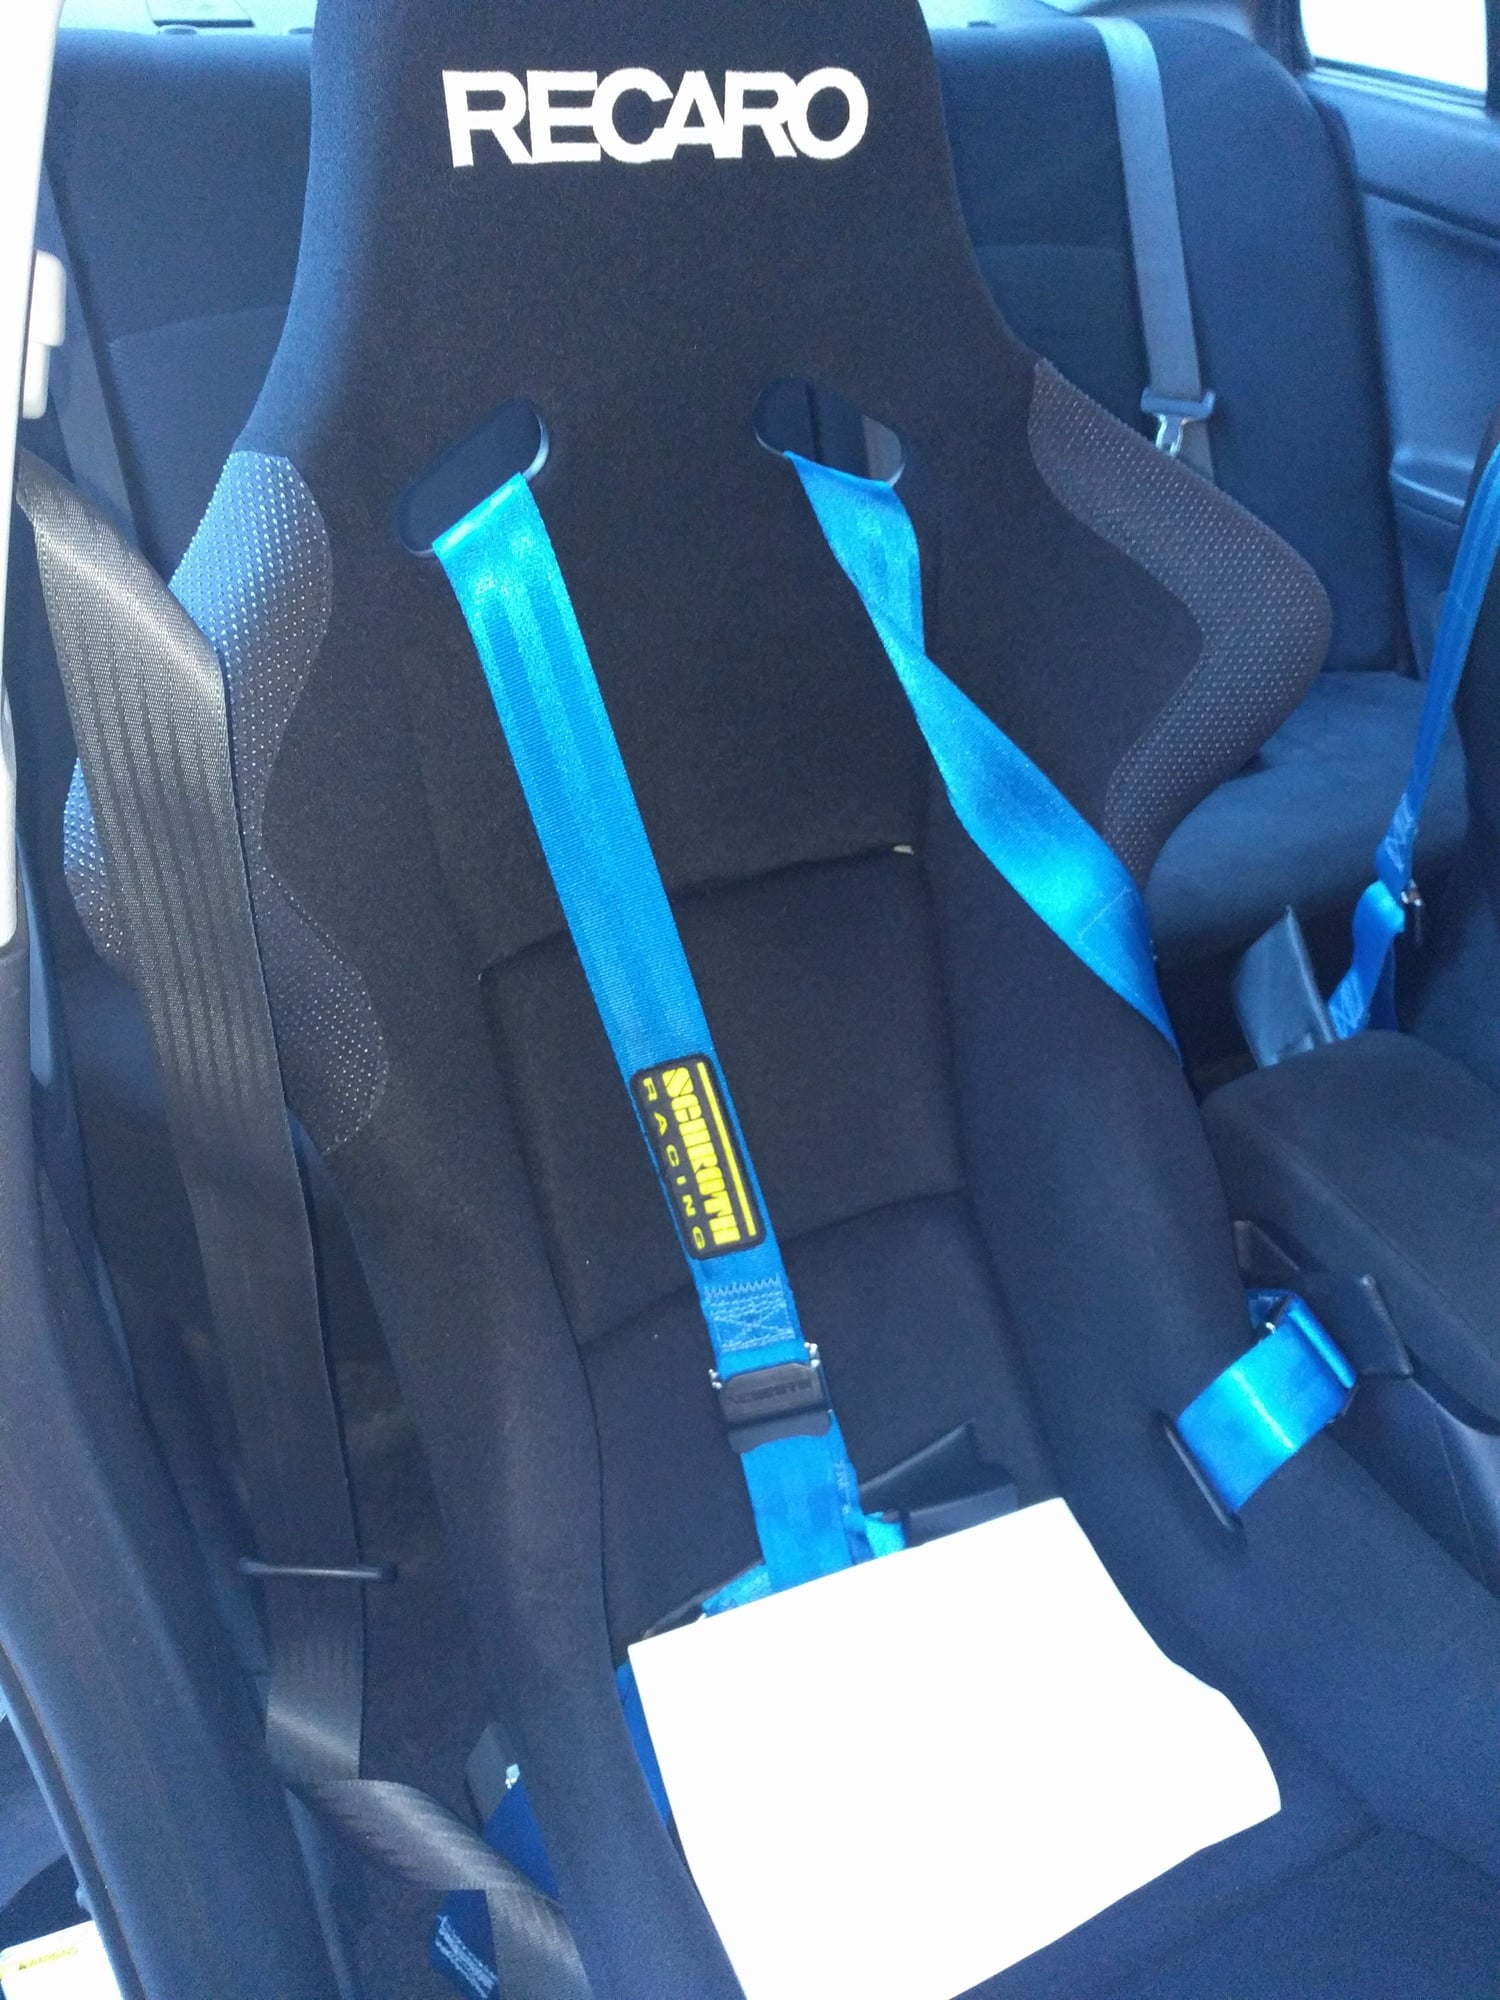 Interior/Upholstery - 2018 Recaro Profi SPG Seat for Sale - (sat in for a total of 3 hours) - Used - All Years Any Make All Models - New York, NY 11104, United States